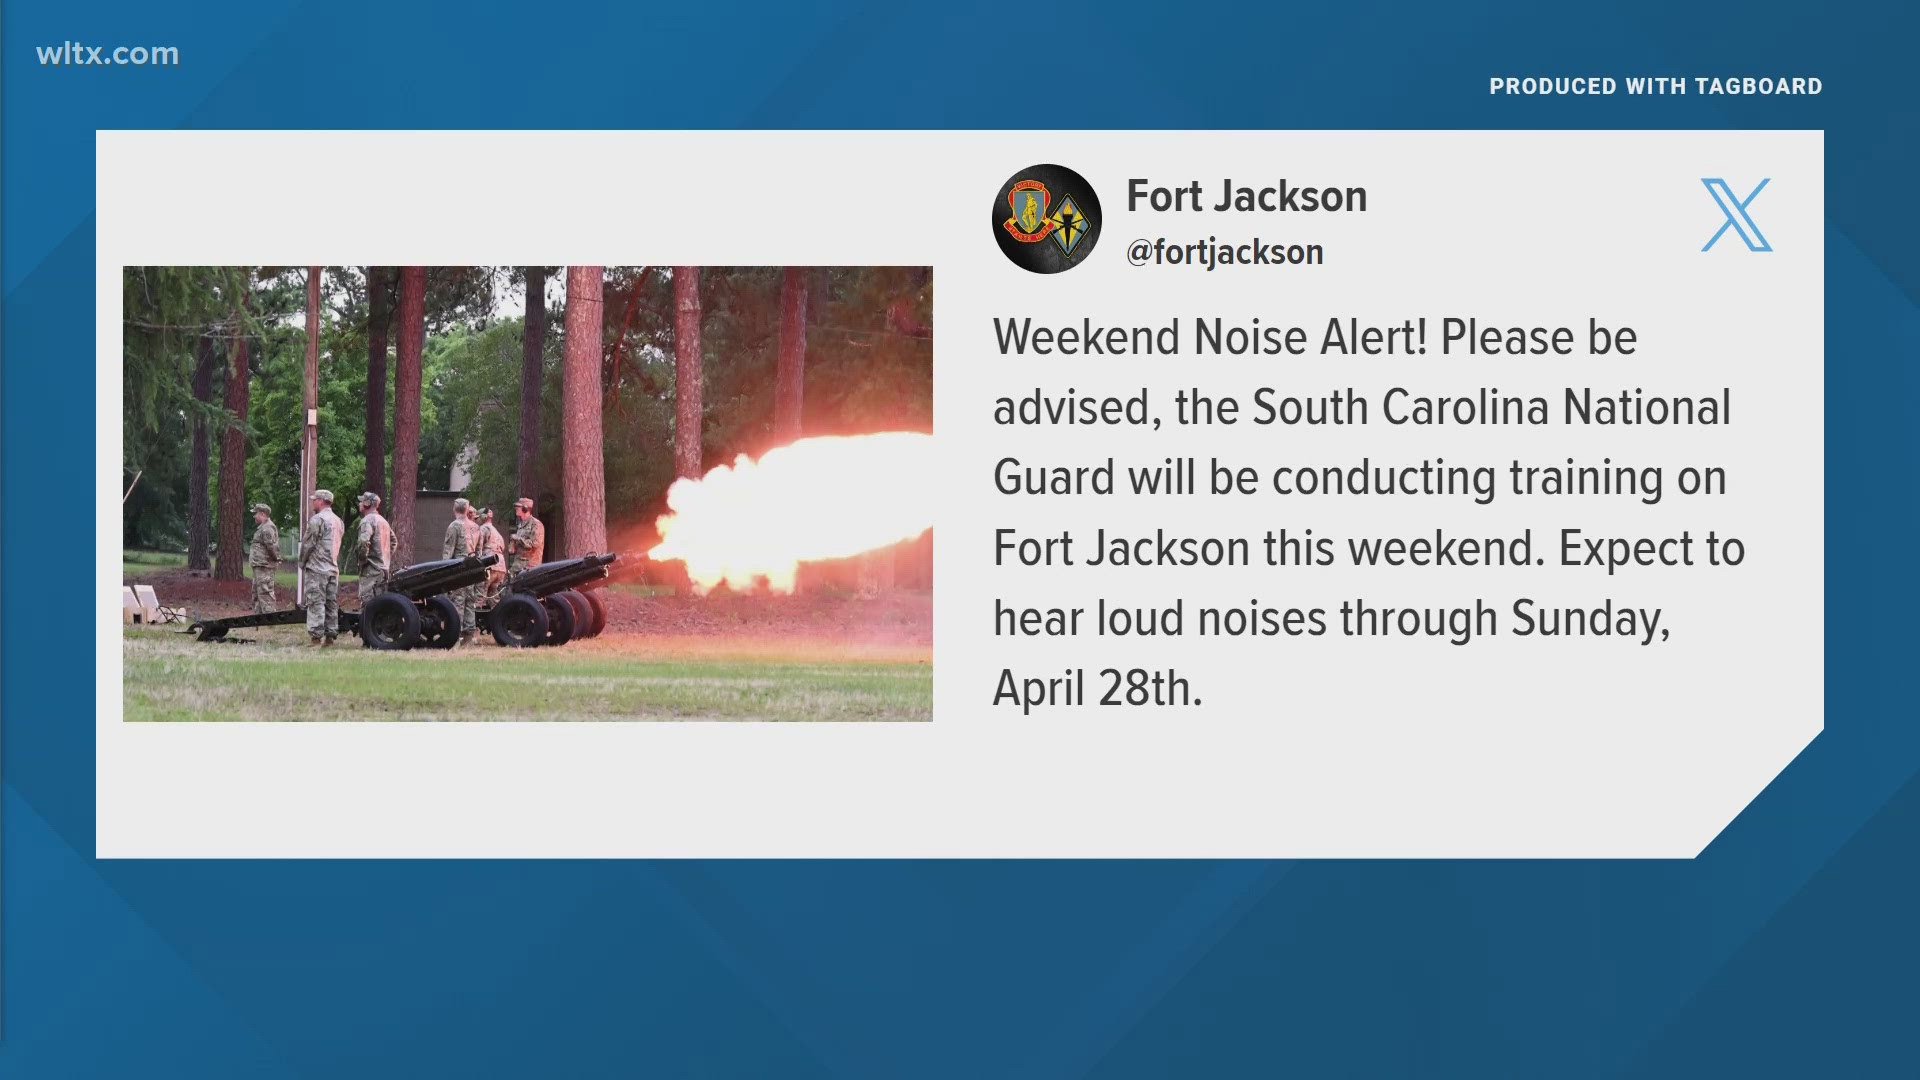 The South Carolina National Guard is practicing this weekend at Fort Jackson.